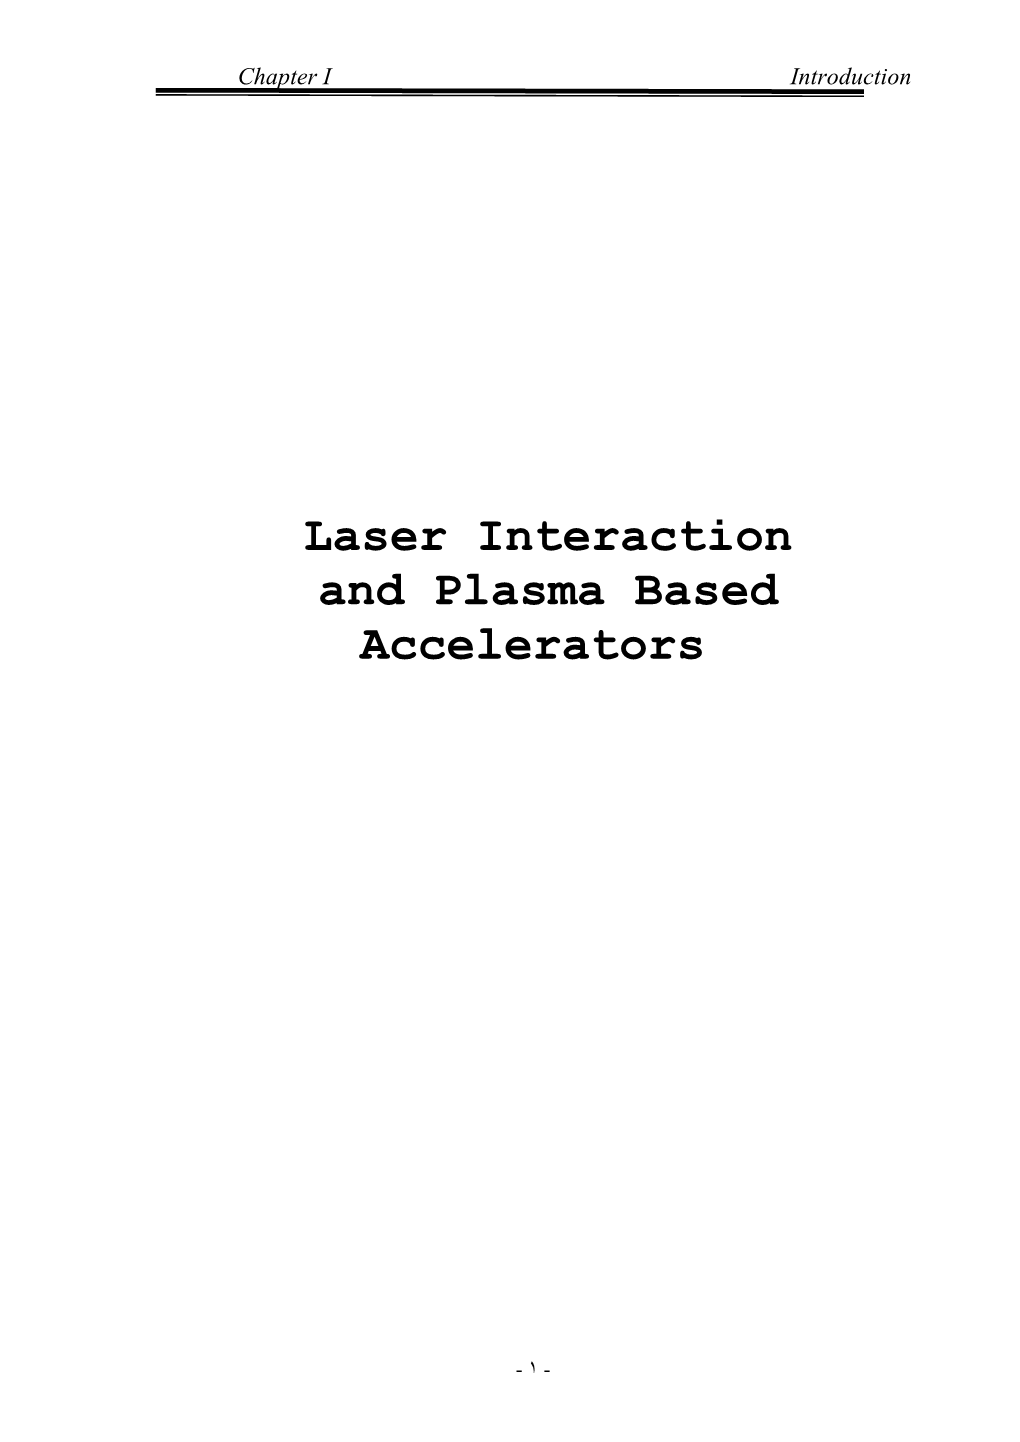 Laser Interaction and Plasma Based Accelerators